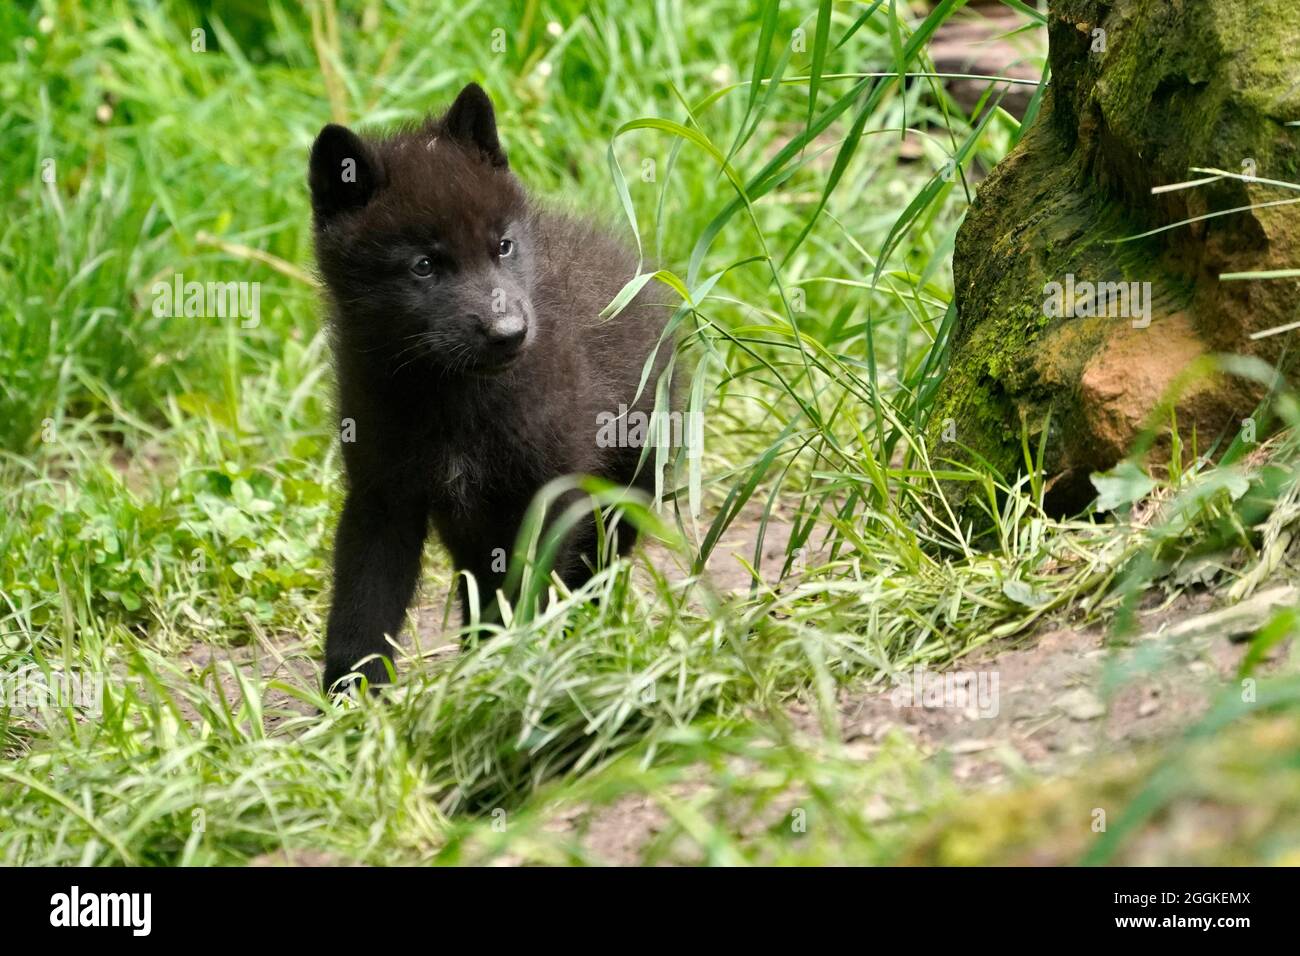 Timber wolf, american wolf (Canis lupus occidentalis), puppy at burrow, Germany Stock Photo